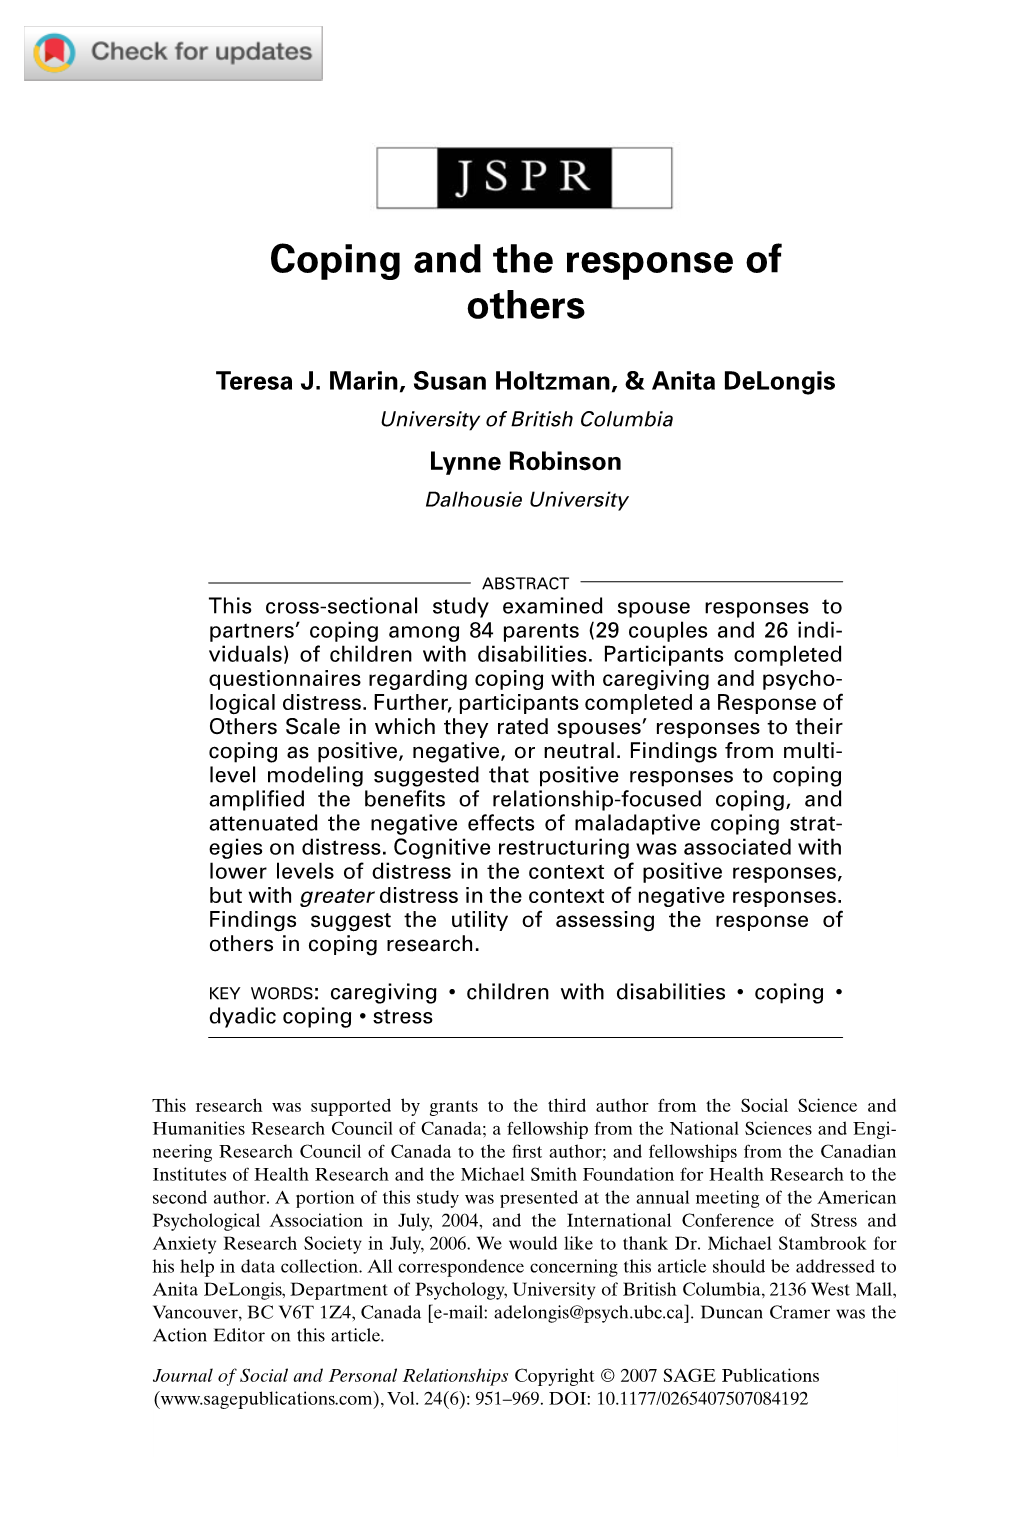 Coping and the Response of Others